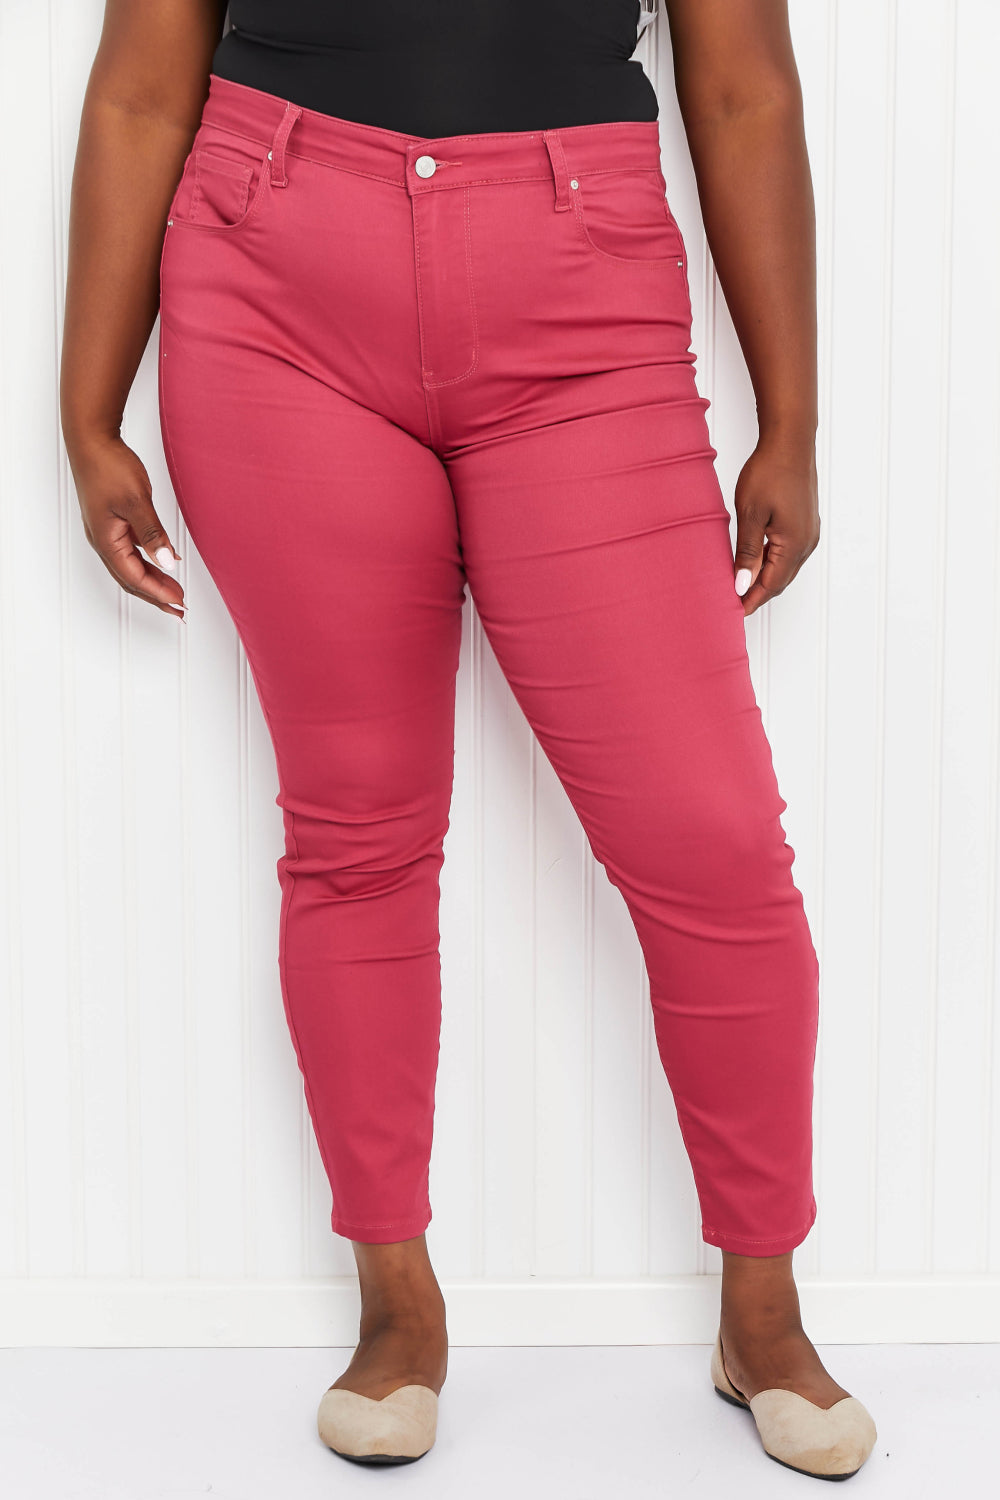 Walk the Line High Rise Skinny Jeans in Rose